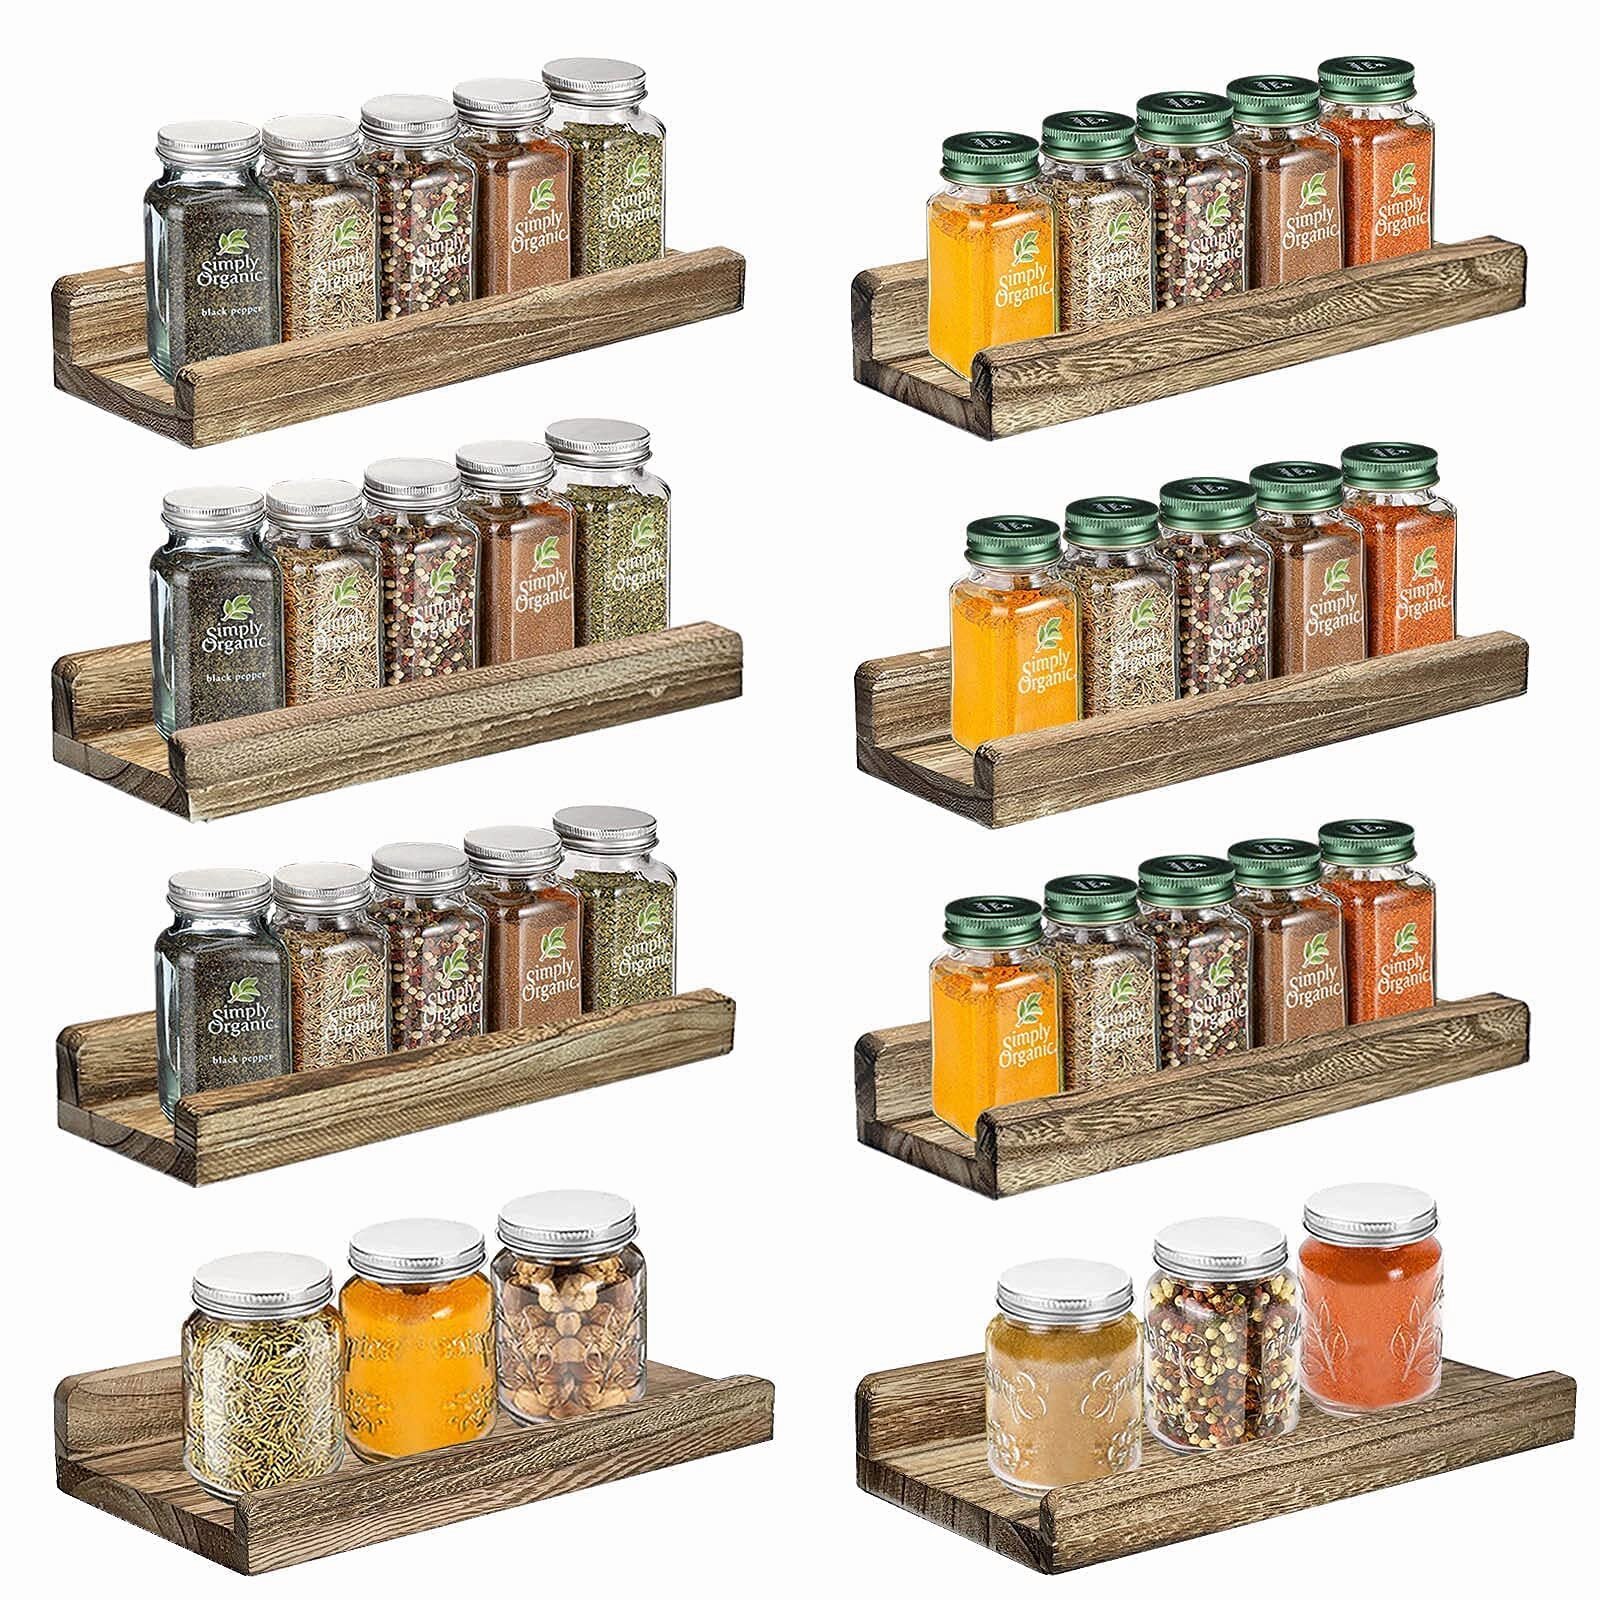 Wooden Spice Rack Wall Mount Seasoning Rack Organizer ,Wood Small Hanging  Floating Shleves For Kitchen ,25 Pack 25 Tier Mountable Farmhouses Especiero  ...